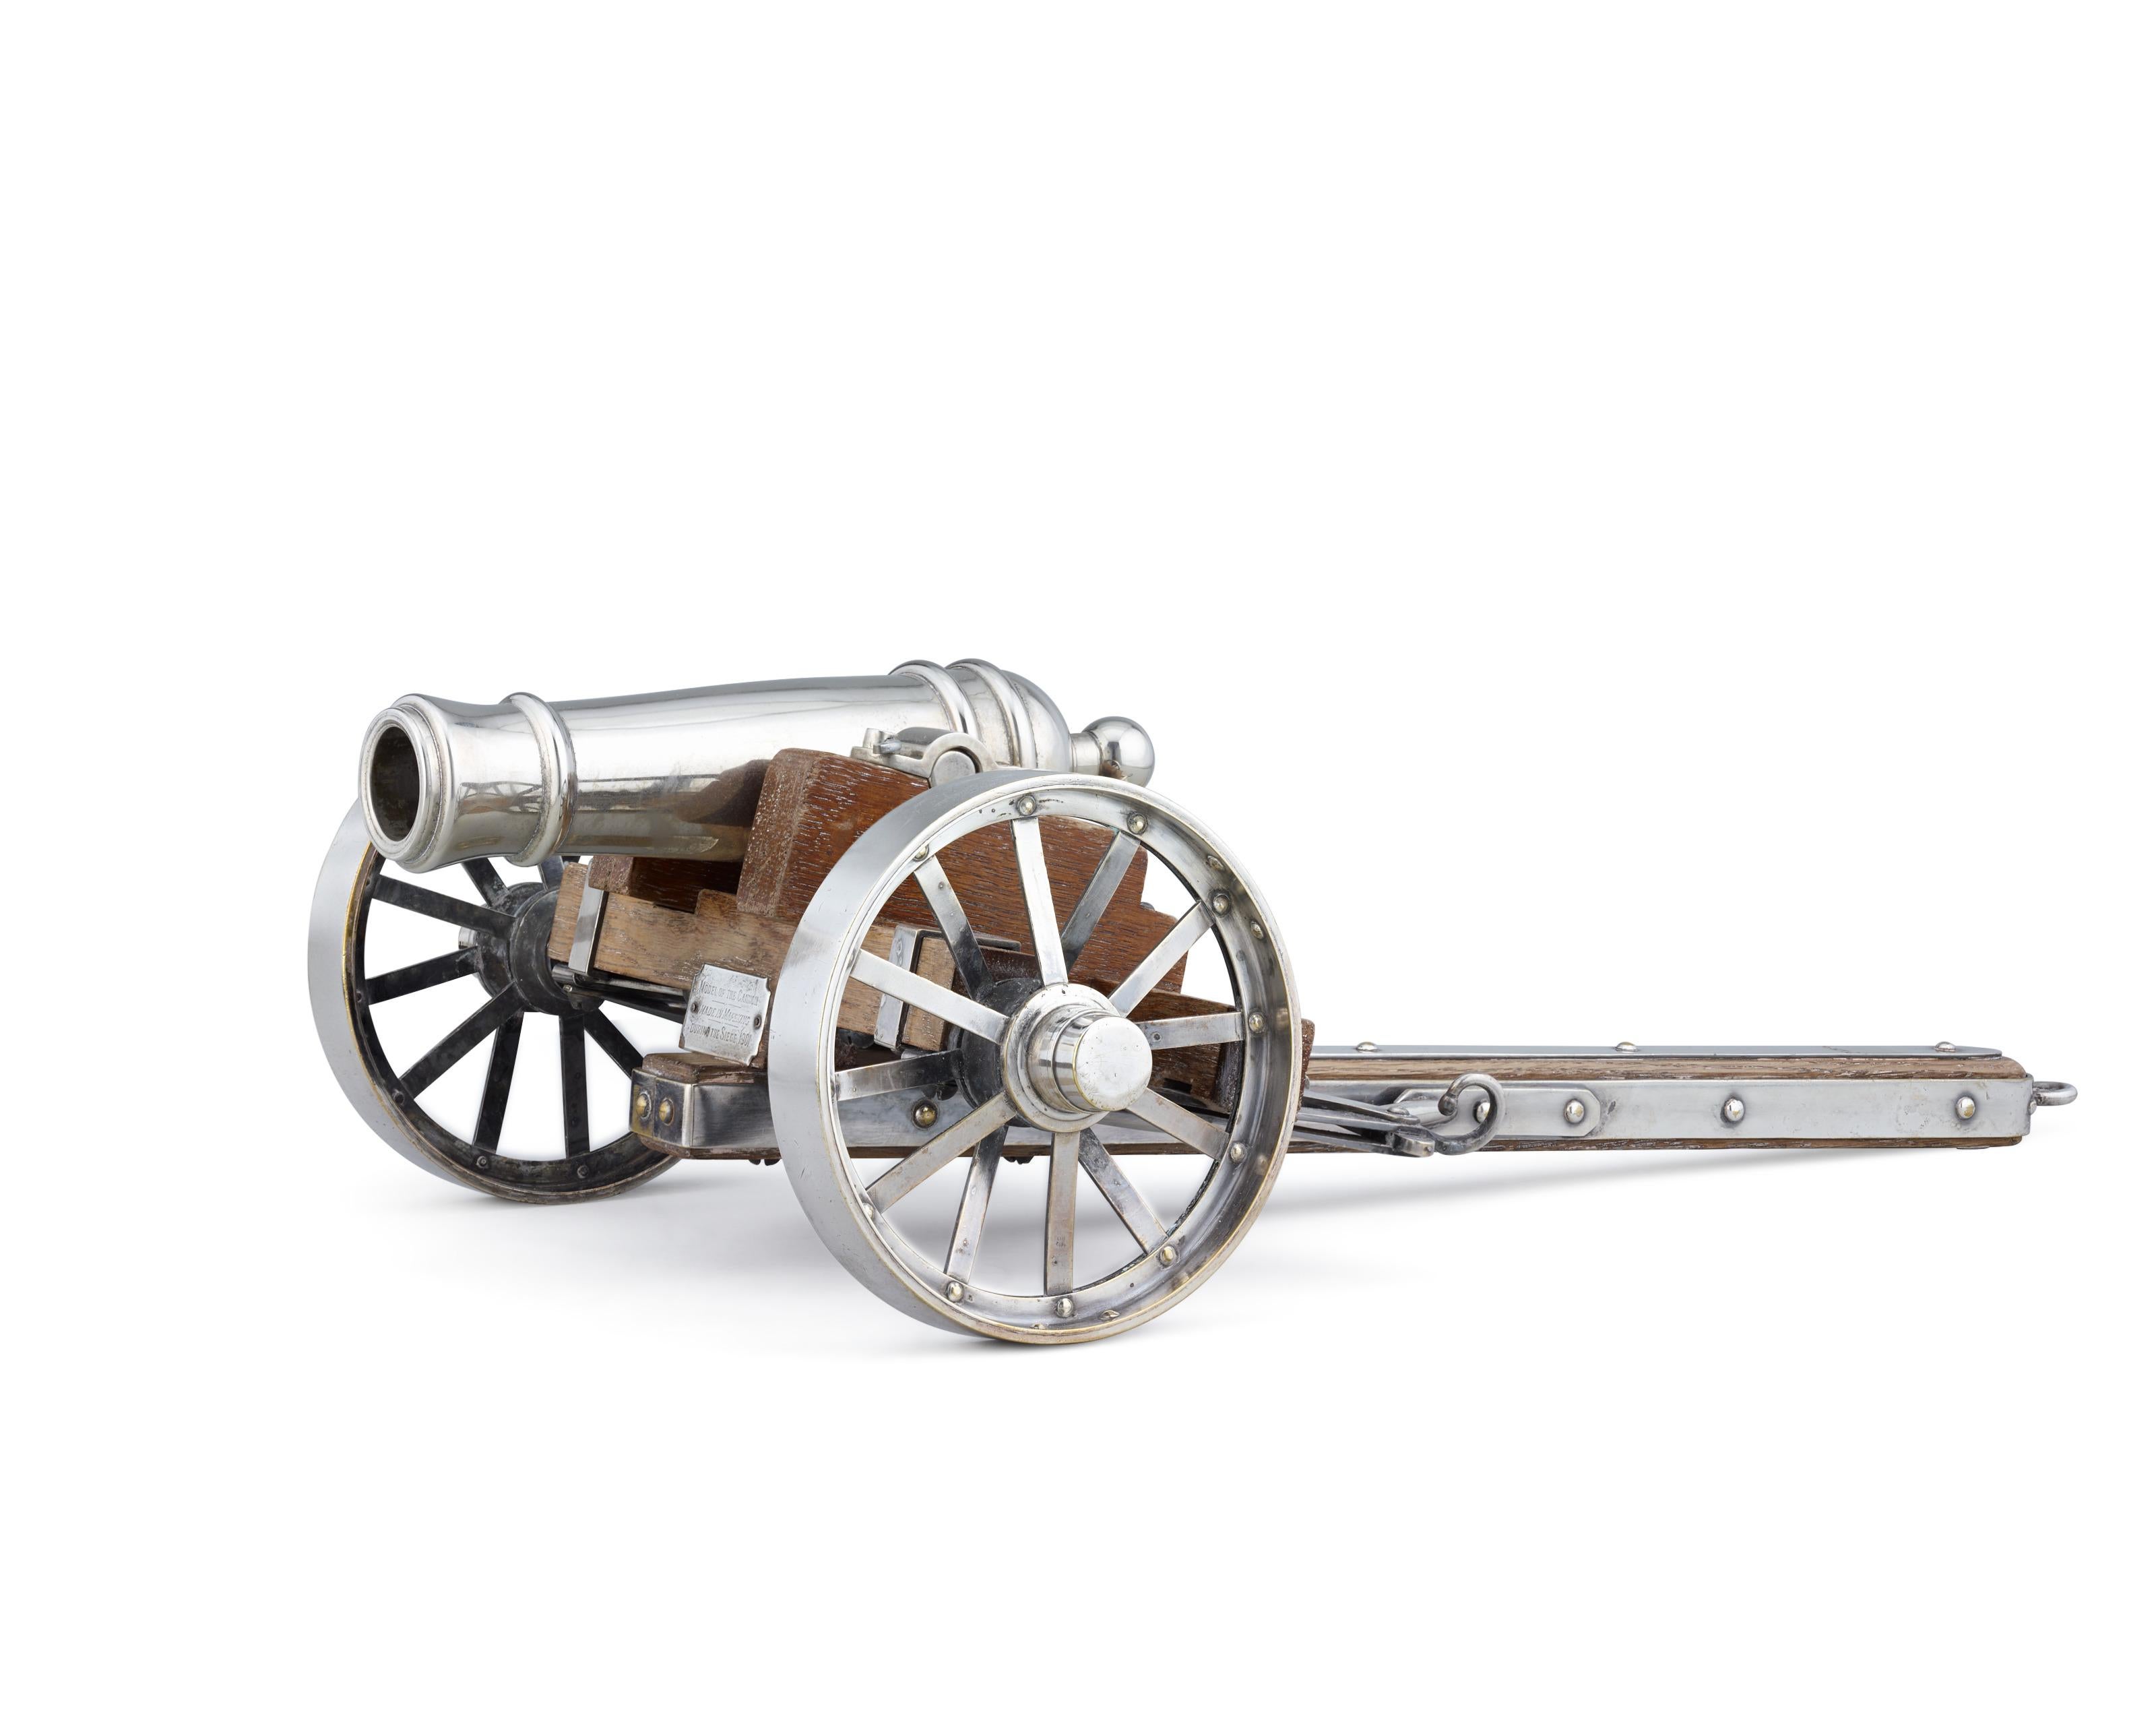 cannon on wheels